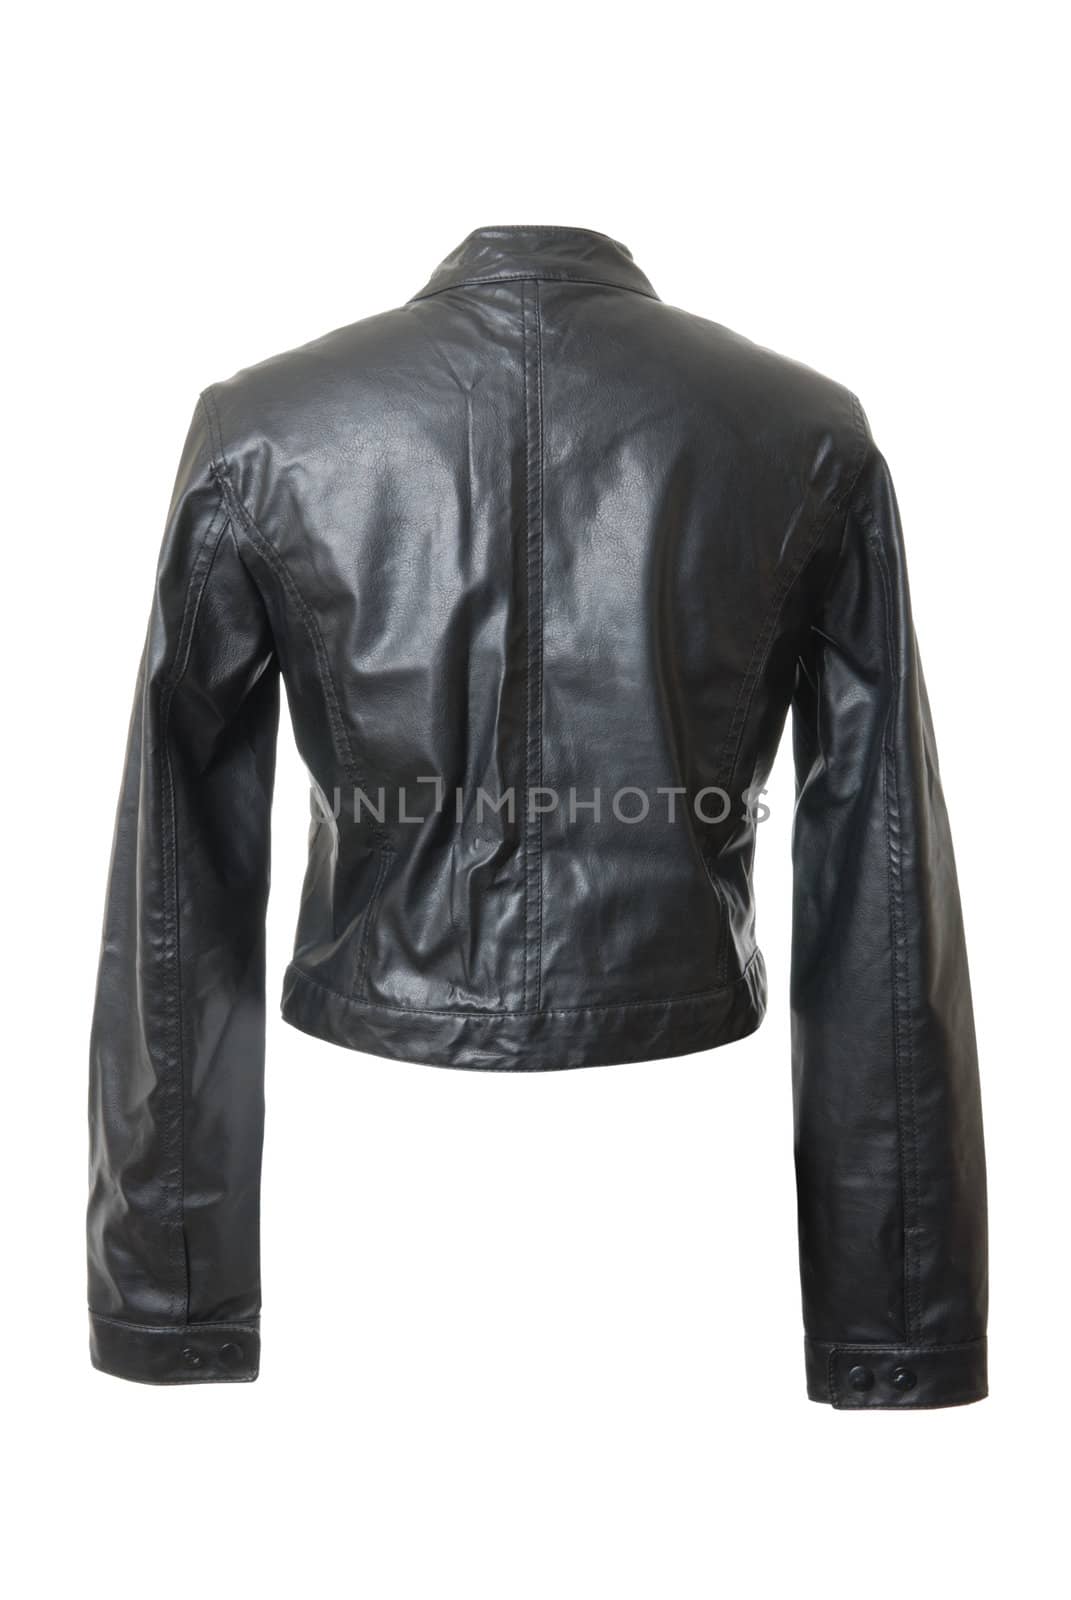 Black and short female leather jacket. Rear view. Isolated on white background